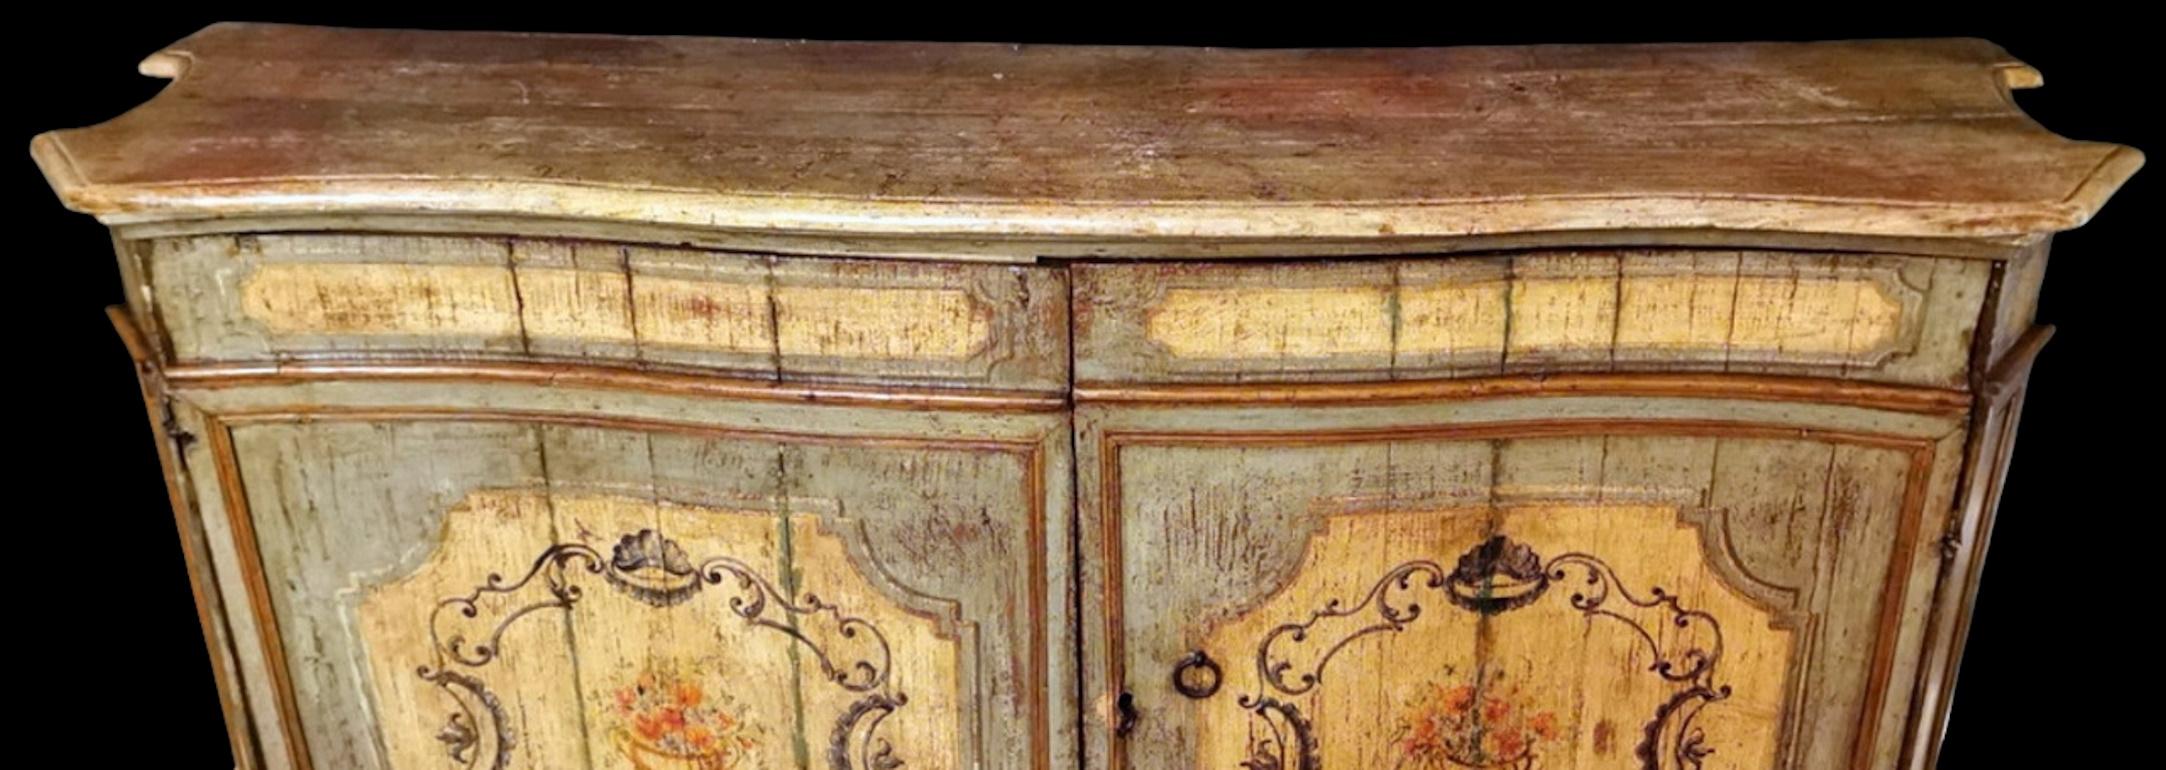 17th Century Louis XIV Style Italian Venetian Lacquered Sideboard For Sale